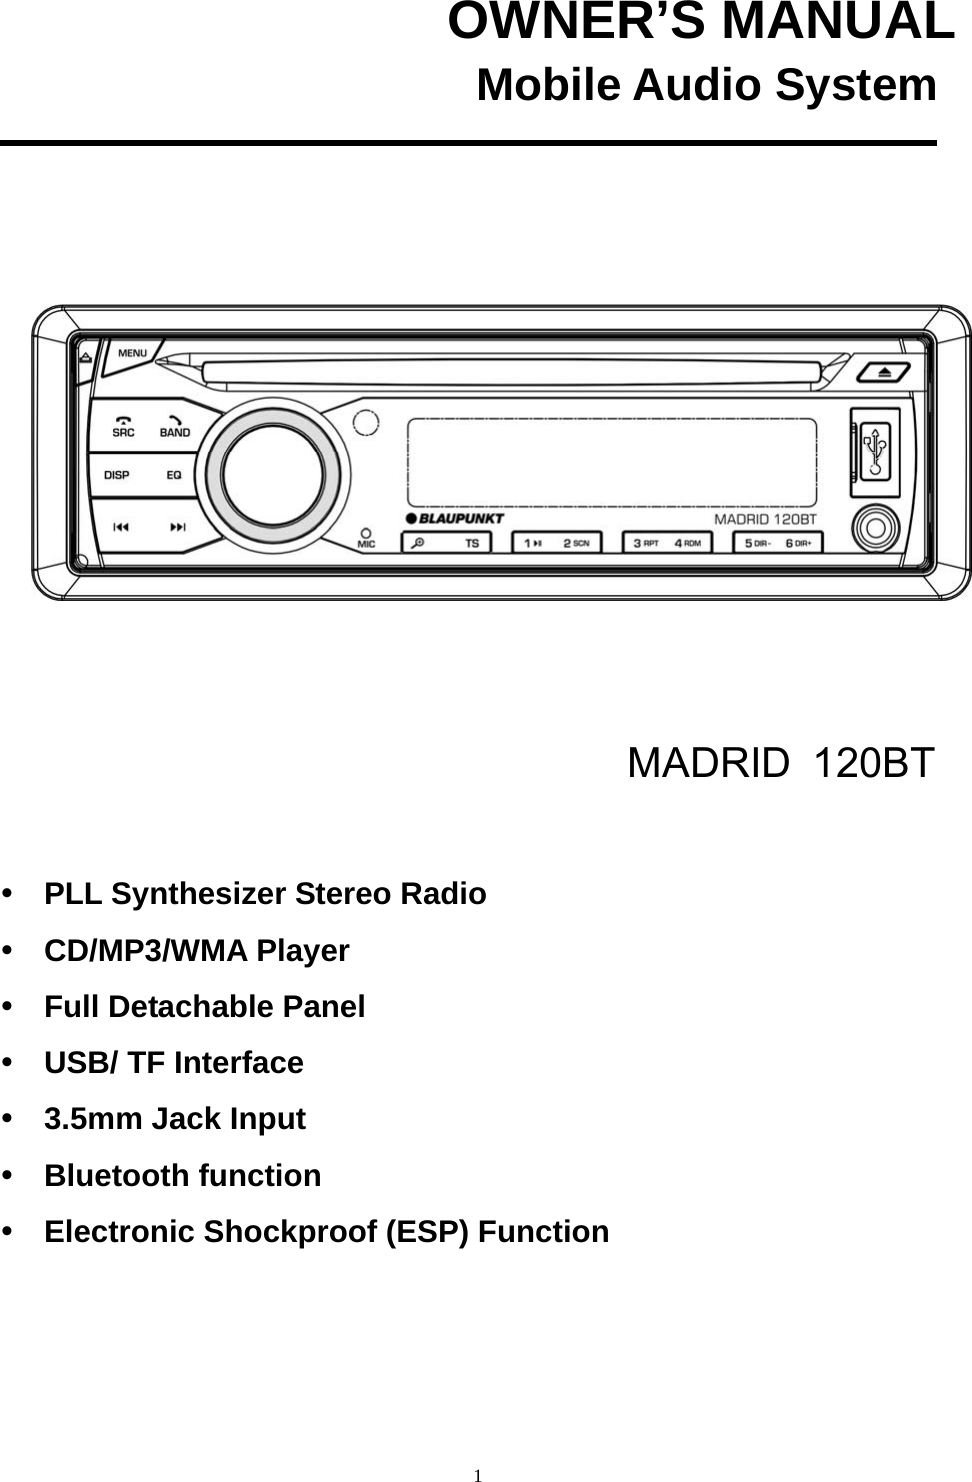  1OWNER’S MANUAL                    Mobile Audio System       MADRID 120BT   PLL Synthesizer Stereo Radio  CD/MP3/WMA Player  Full Detachable Panel  USB/ TF Interface  3.5mm Jack Input  Bluetooth function  Electronic Shockproof (ESP) Function  